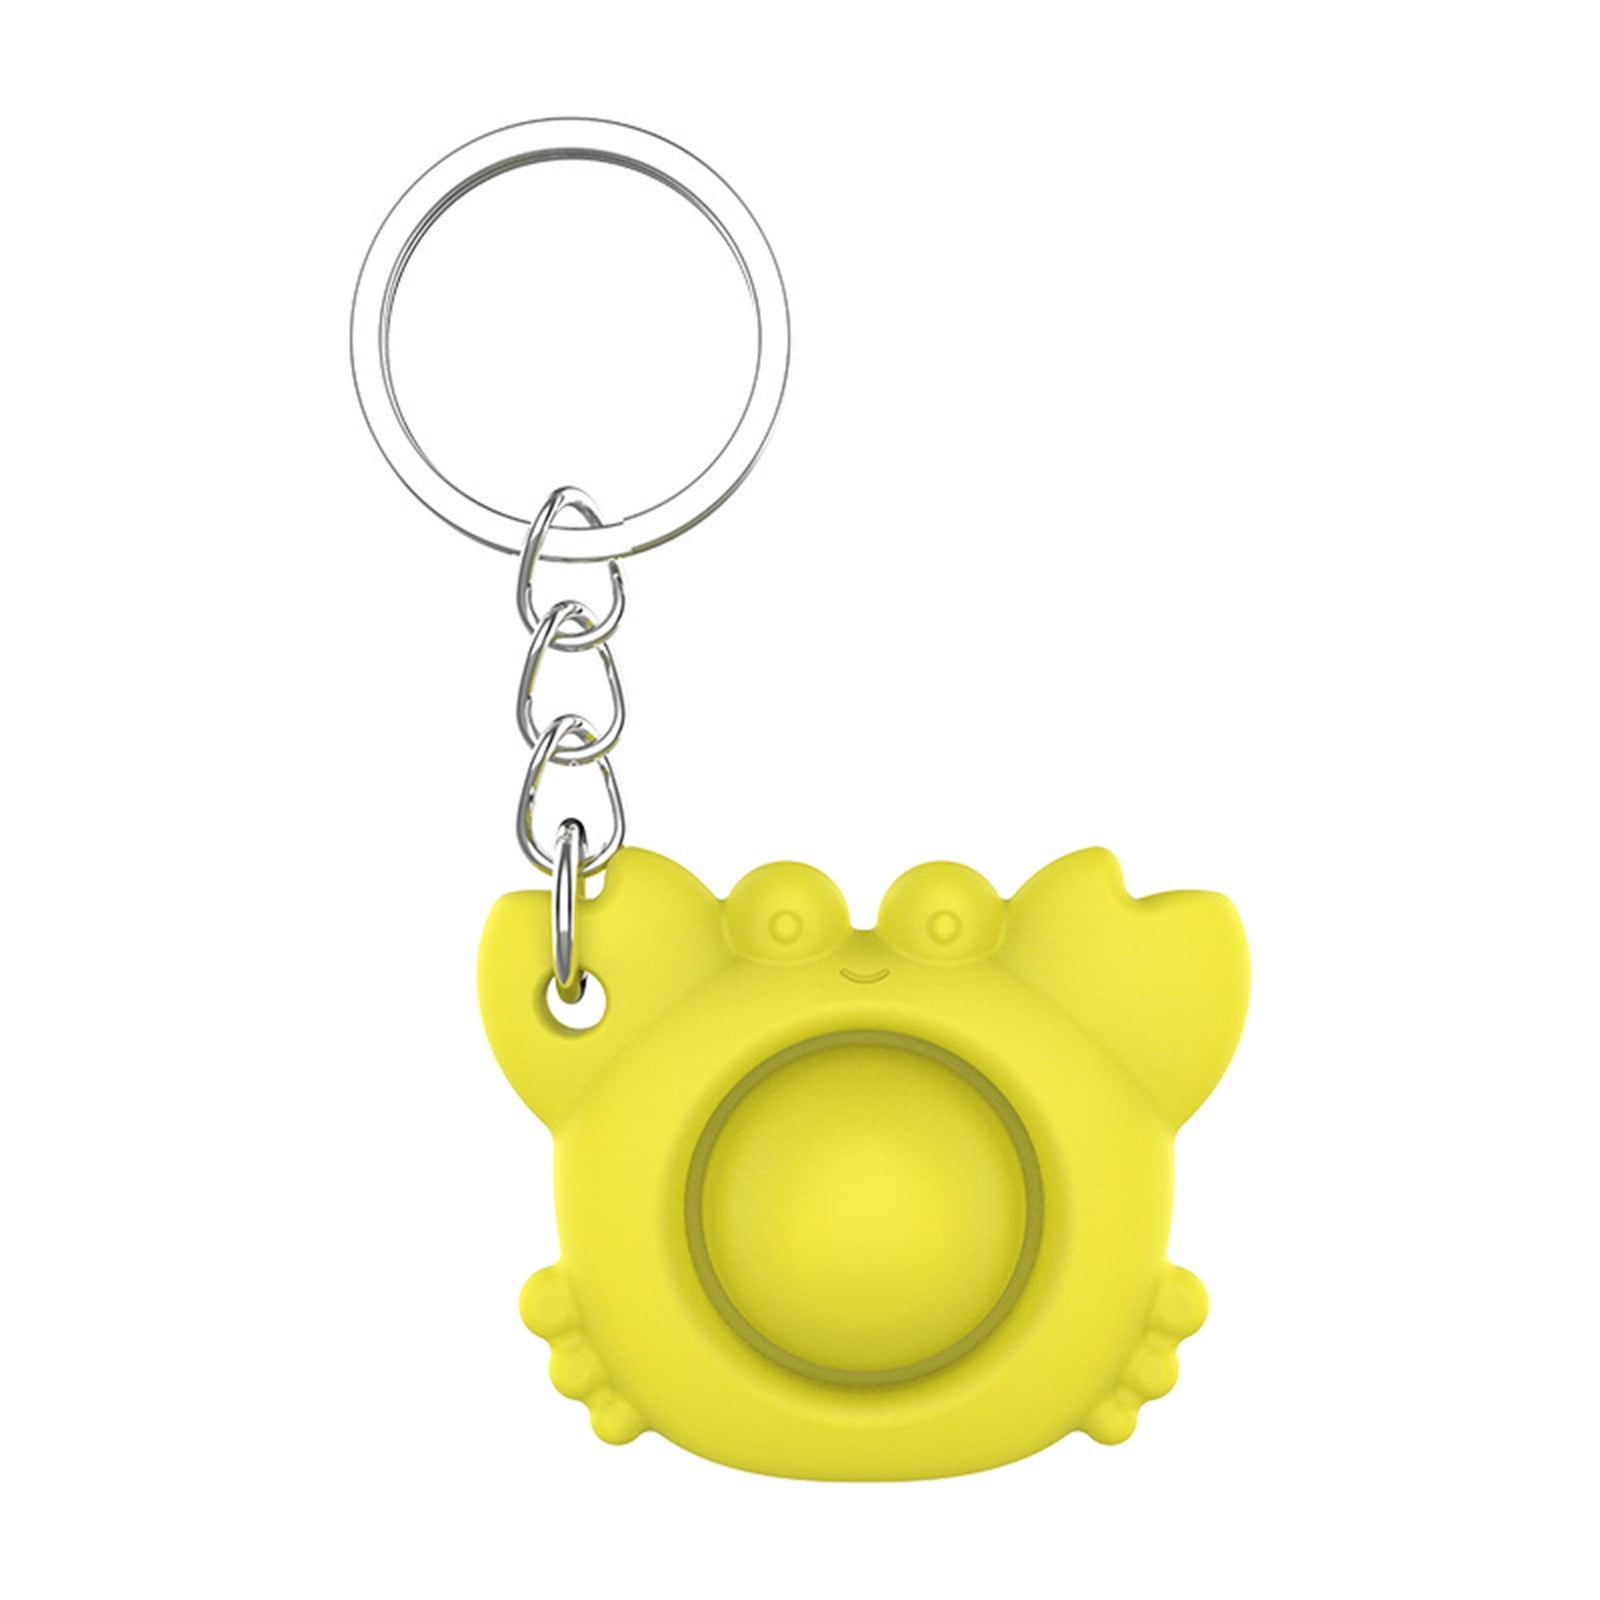 Christmas Concepts® Exclusive Hand Fidget Key Chain Toy Stress Reducer, 